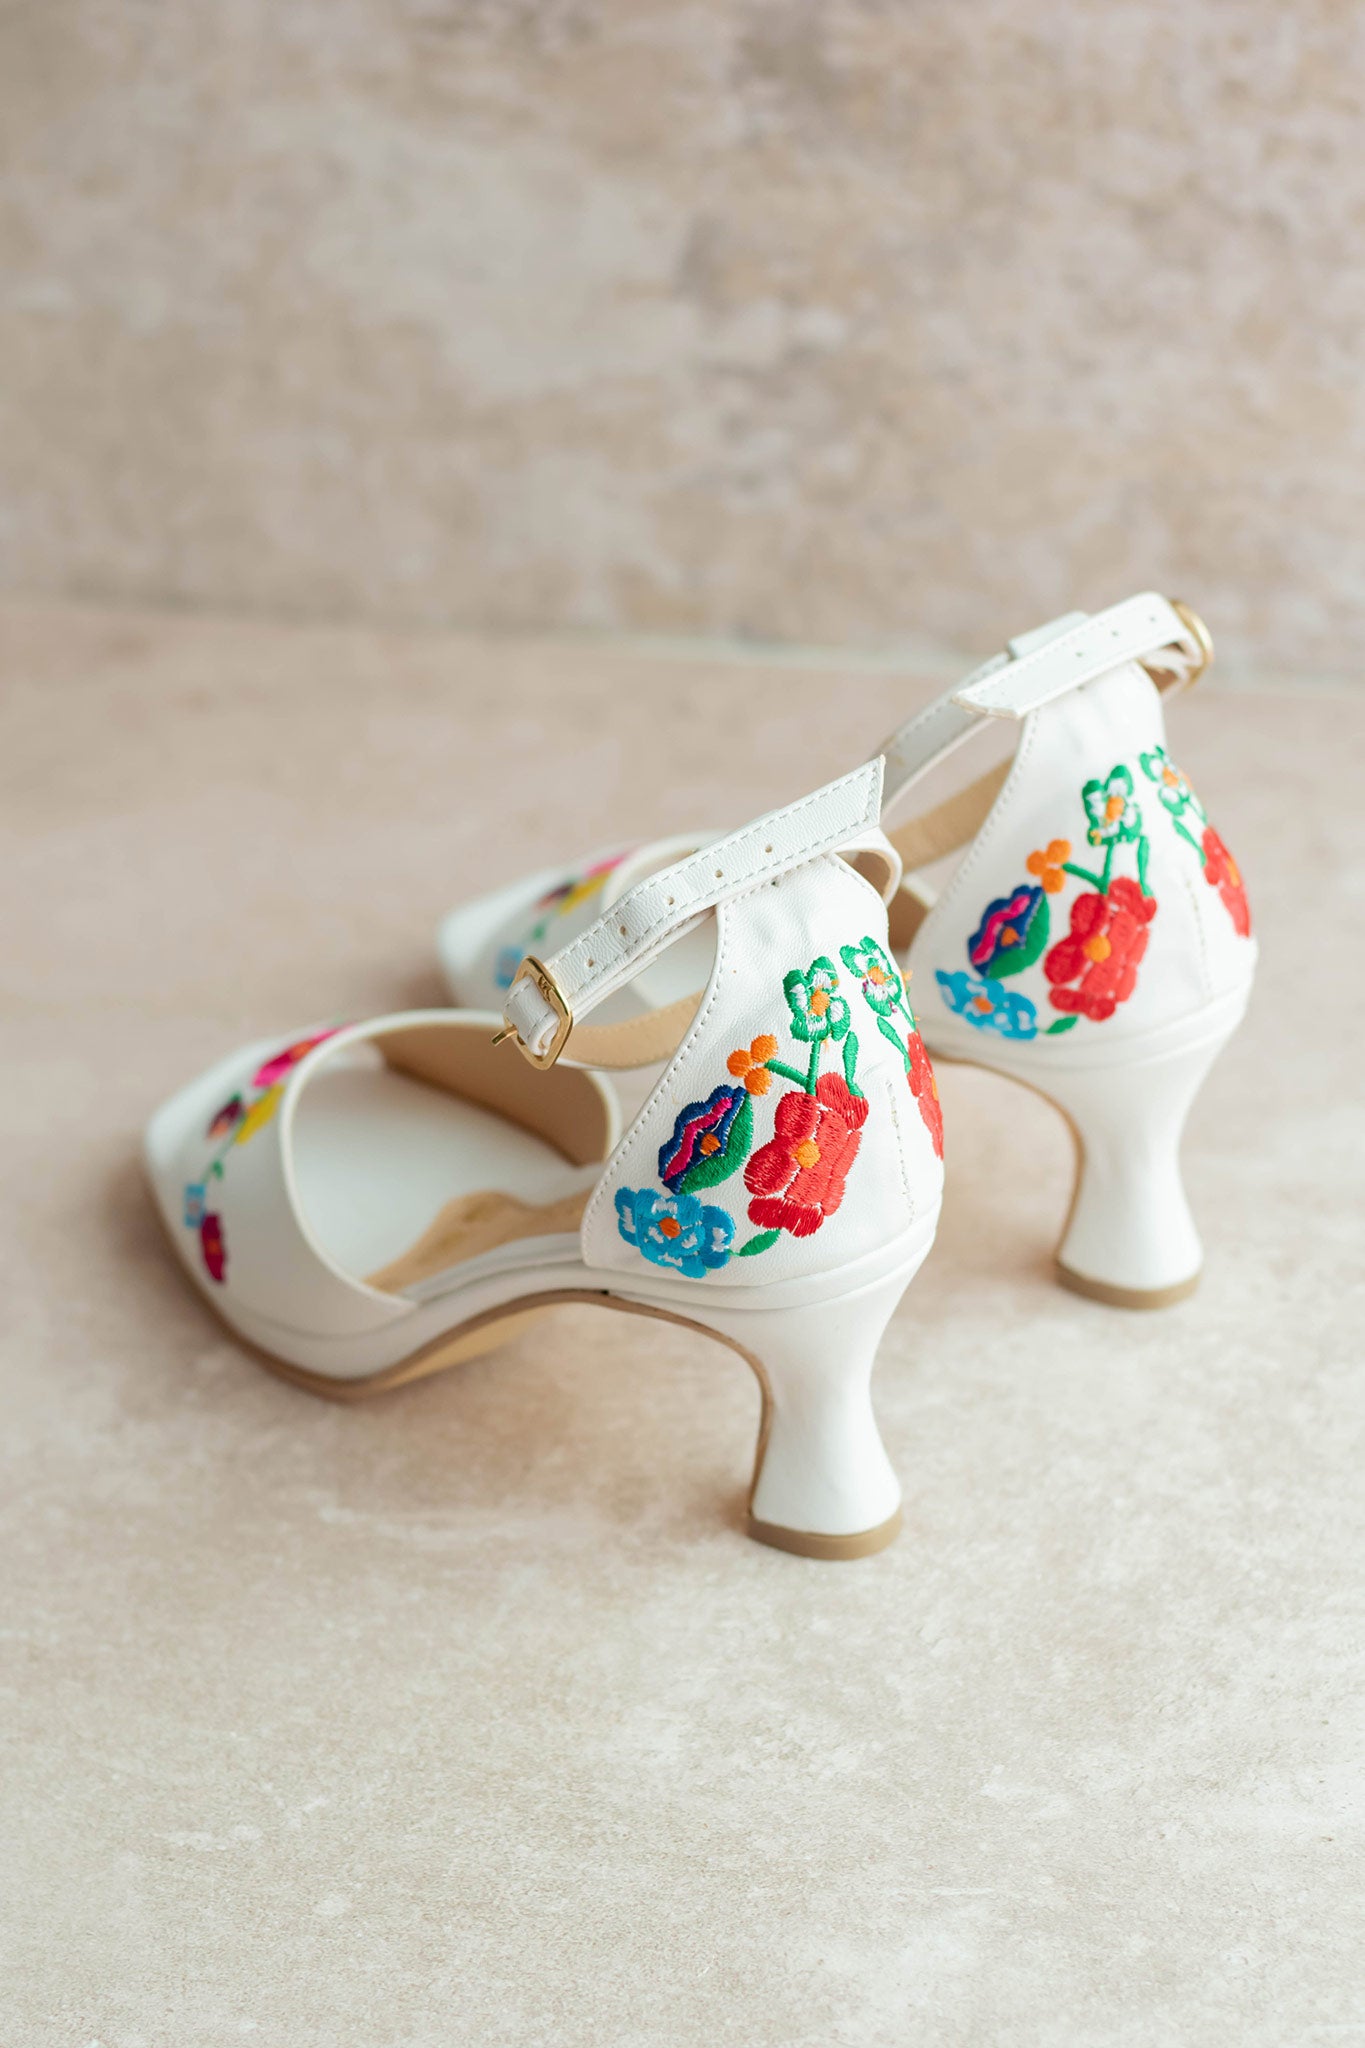 EncantoFloral - Low-Heeled Shoes, Embroidered, Comfortable and Premium Quality, 5684-Y